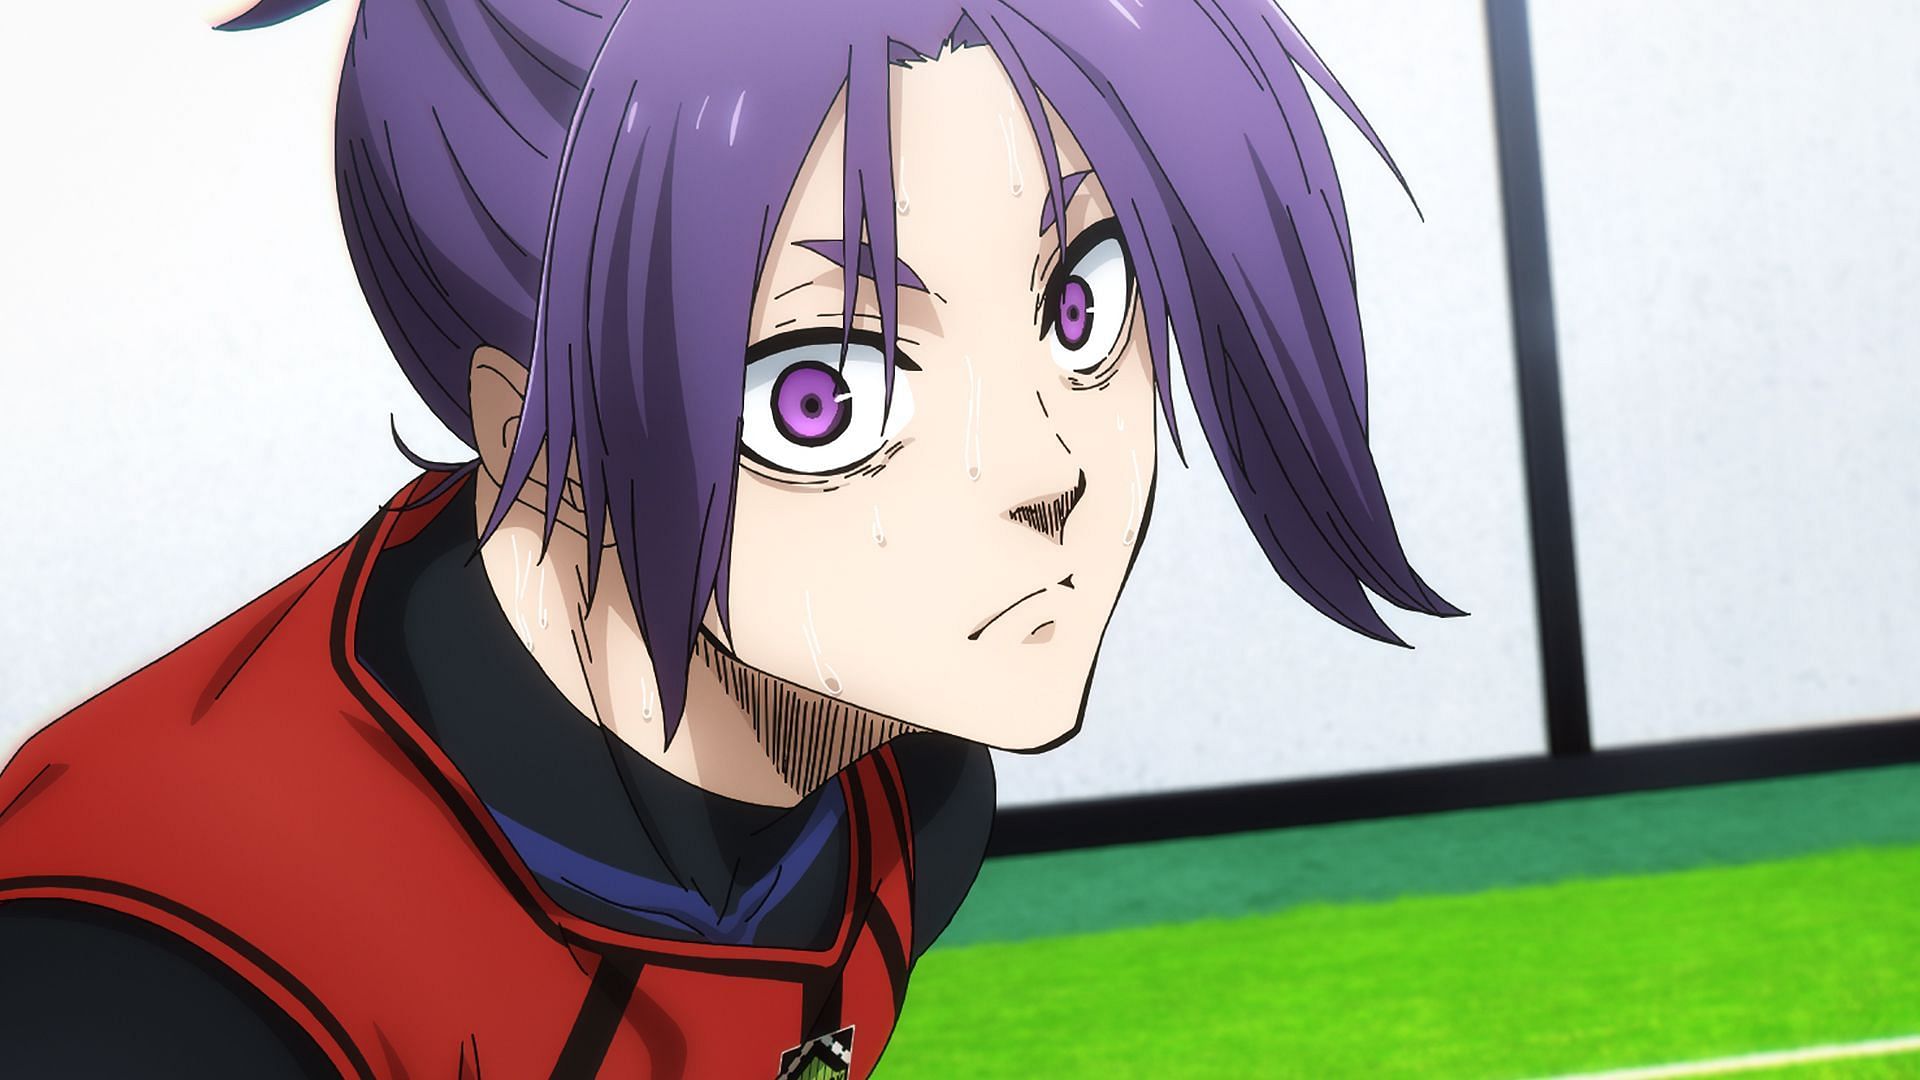 Reo Mikage as seen in anime (Image via 8bit)